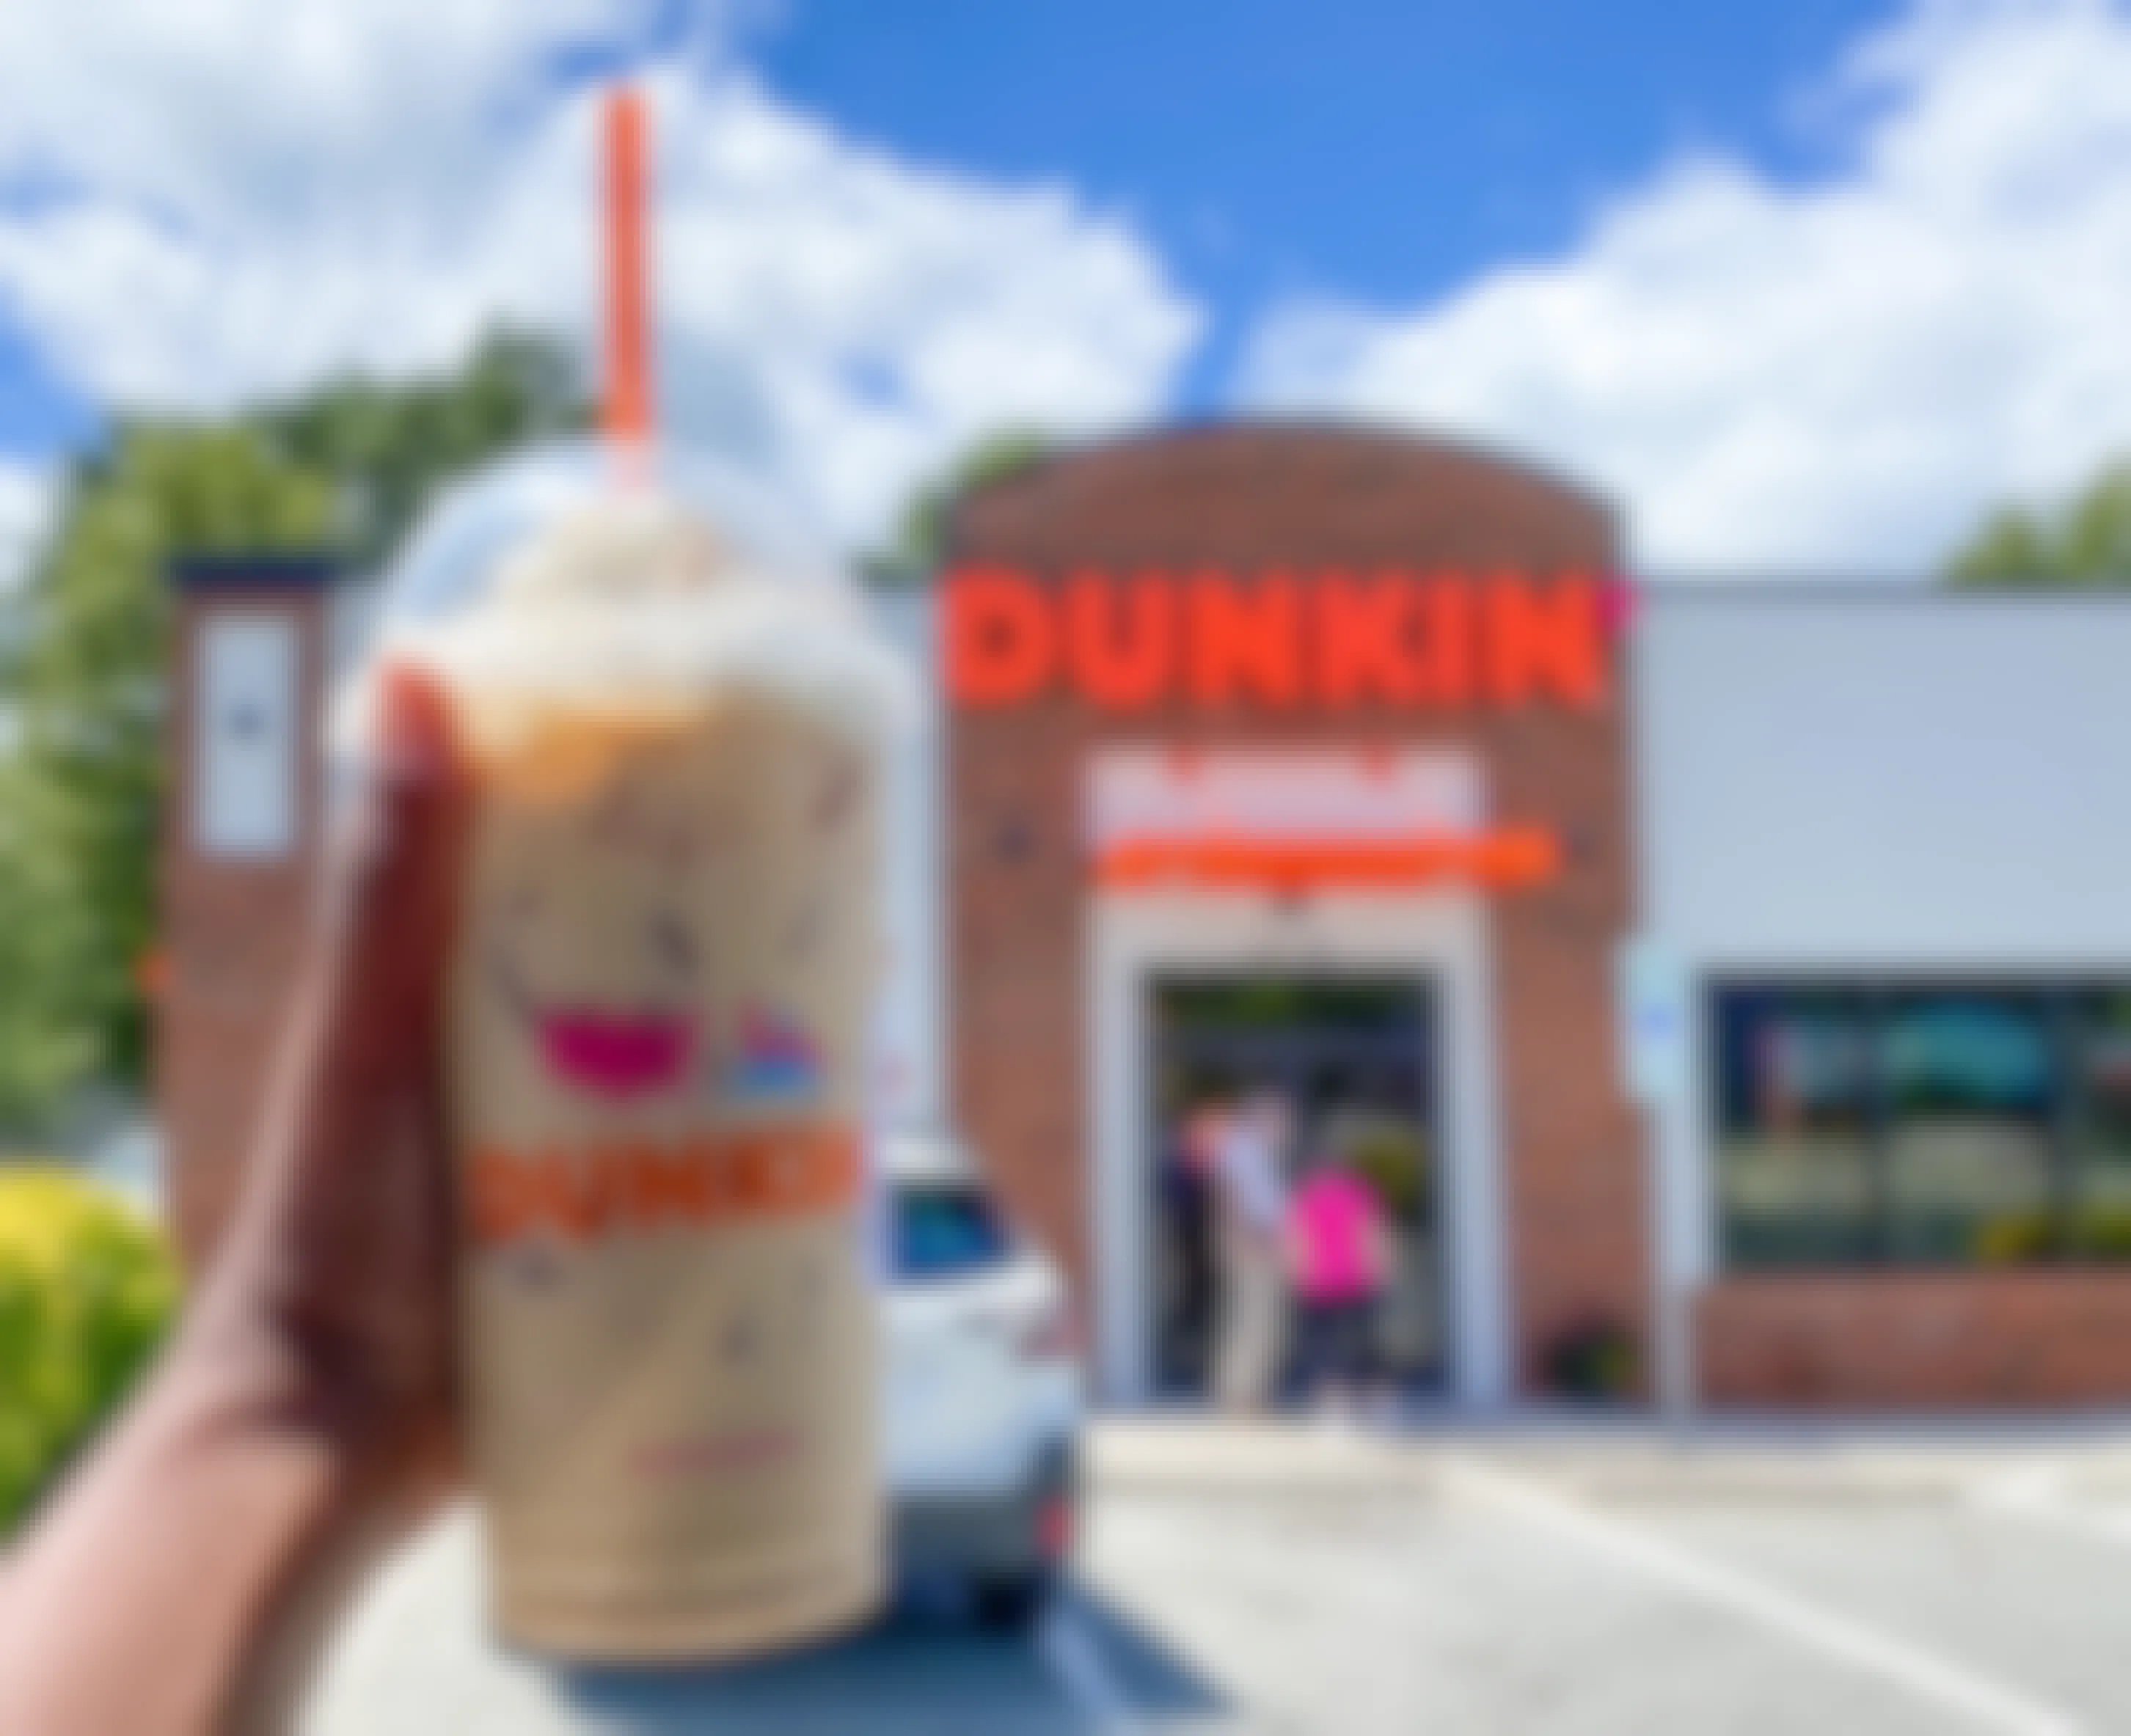 pumpkin spice latte in front of dunkin donuts sign